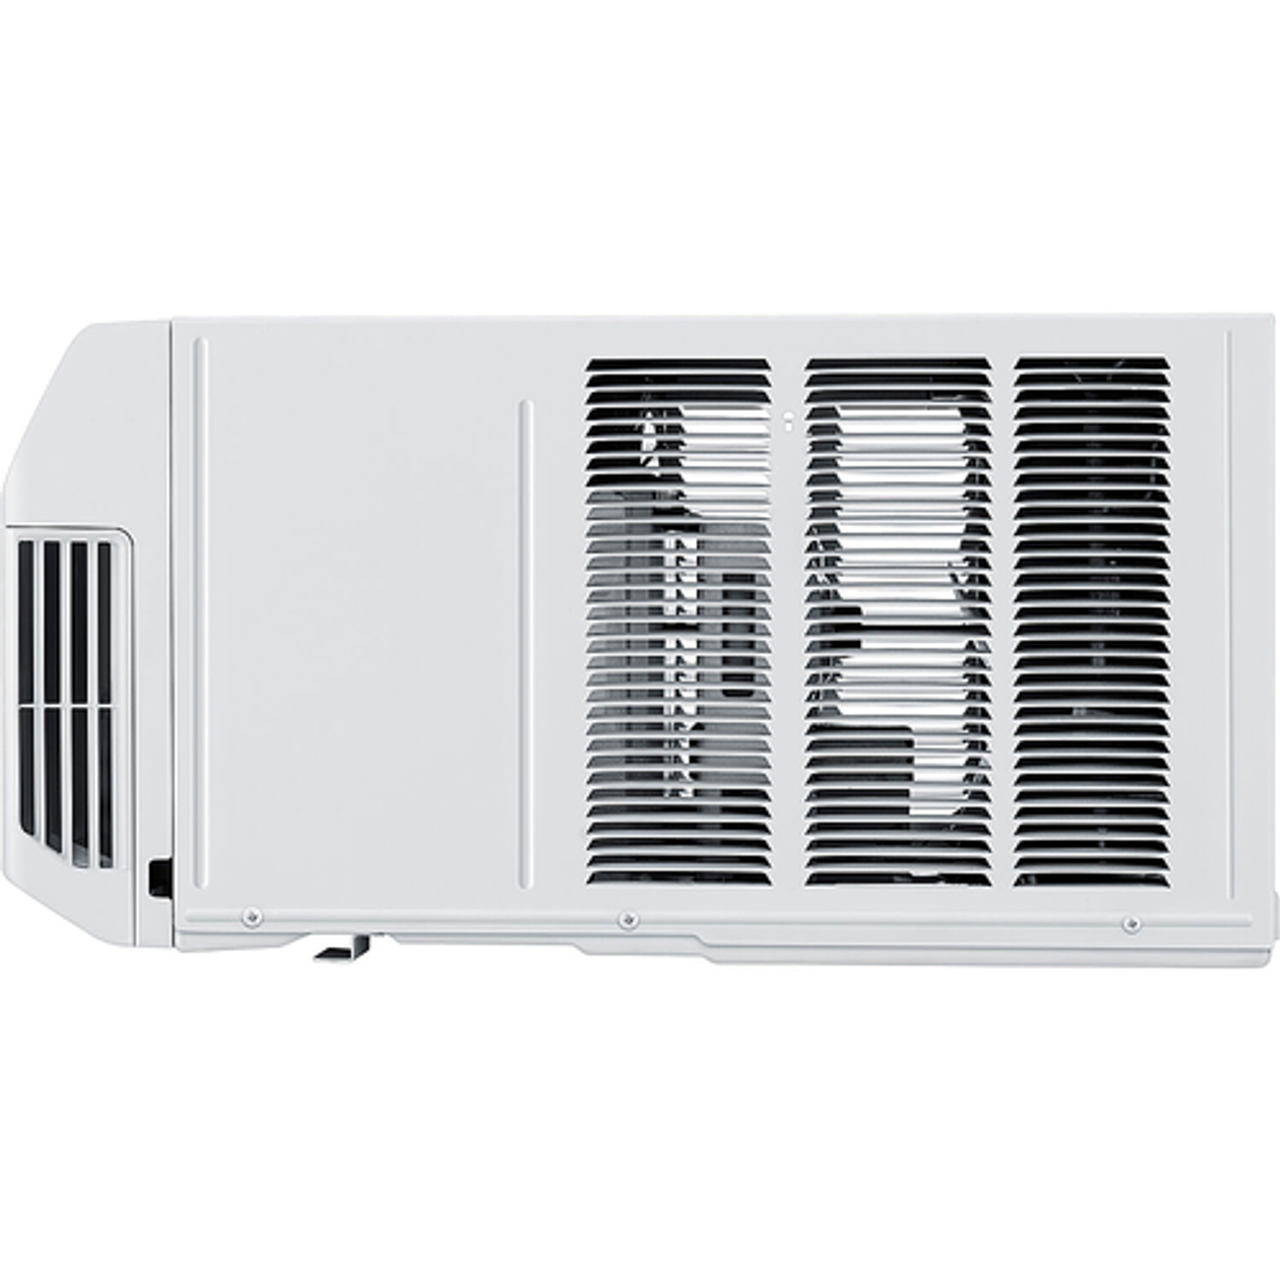 LG - 12,000 BTU High Efficiency Dual Inverter Window Air Conditioner with Wi-Fi and LCD Remote, 115V - White